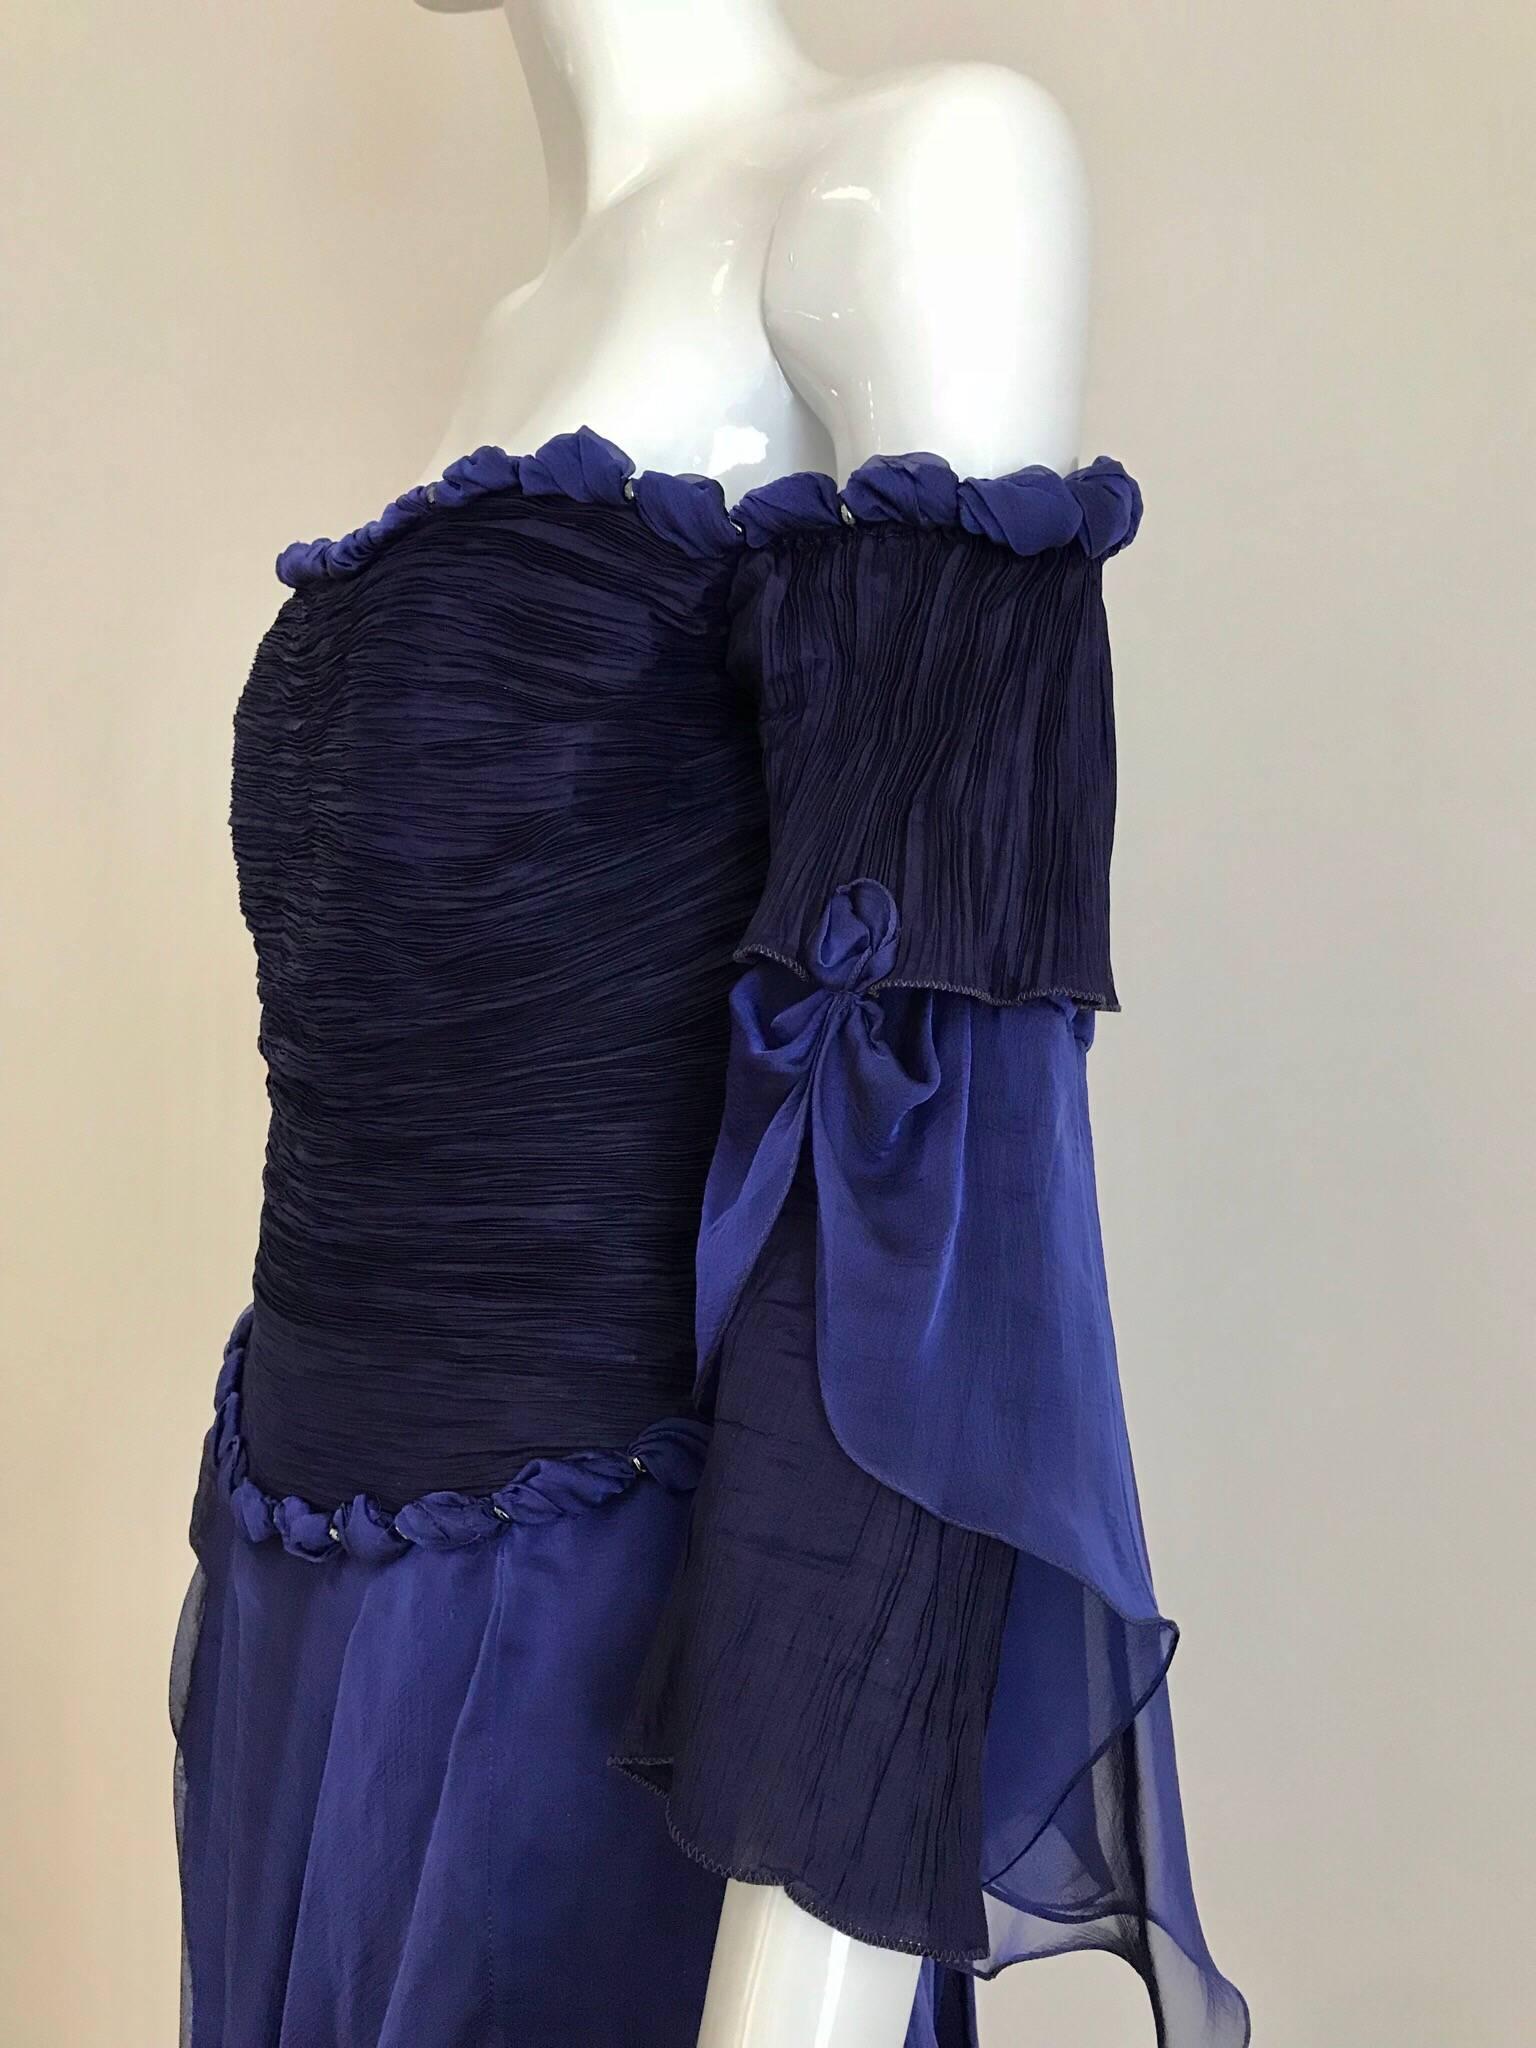 1980s Zandra Rhodes off shoulder purple blue silk chiffon cocktail dress. Fit Size 4
Bust: 34 inches/ Waist: 28 inches 
** minor discoloration inside lining ( see image attached)